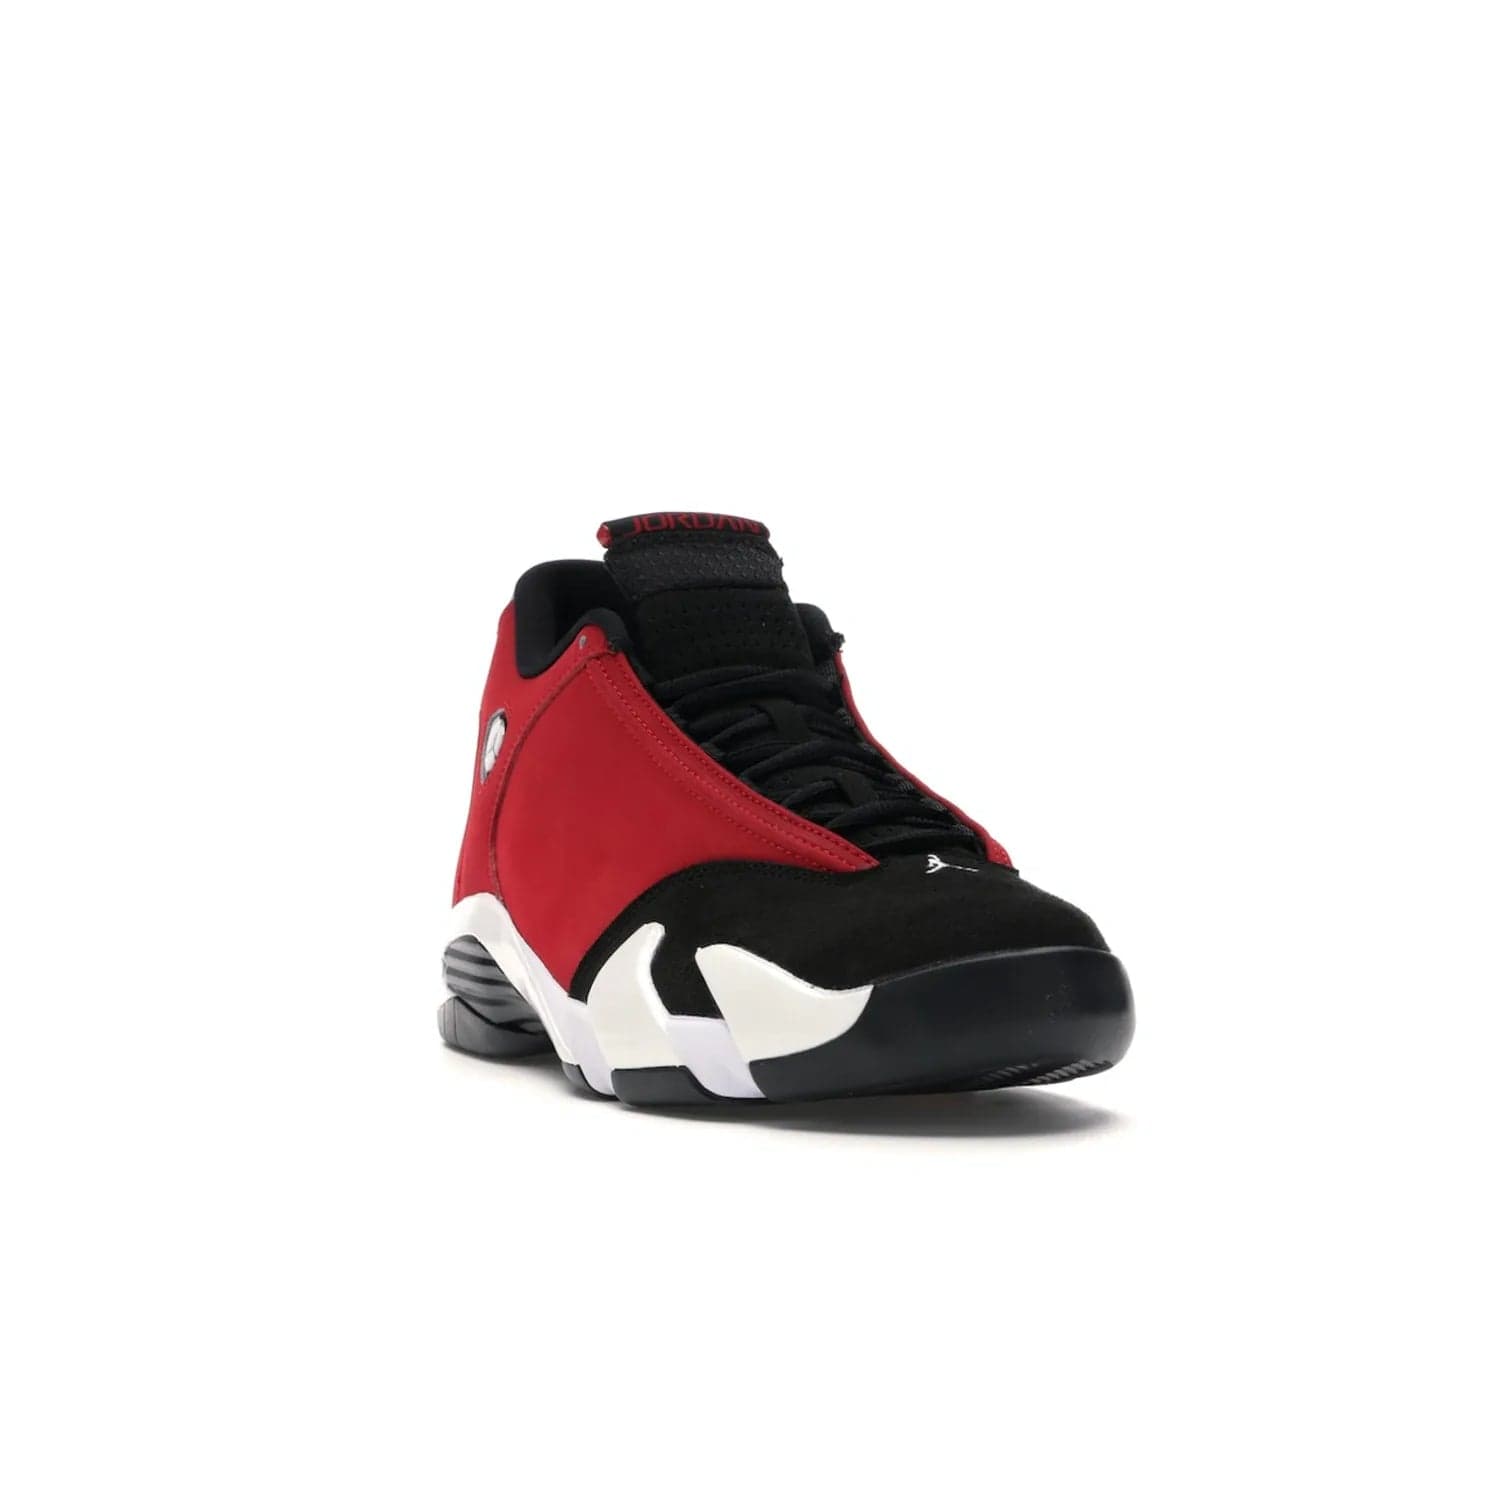 Jordan 14 Retro Gym Red Toro - Image 7 - Only at www.BallersClubKickz.com - Feel the Chicago Bulls energy with the Jordan 14 Retro Gym Red Toro! Black, red, and white design unites performance and fashion. Get your hands on this limited edition Jordan and show off your style today.